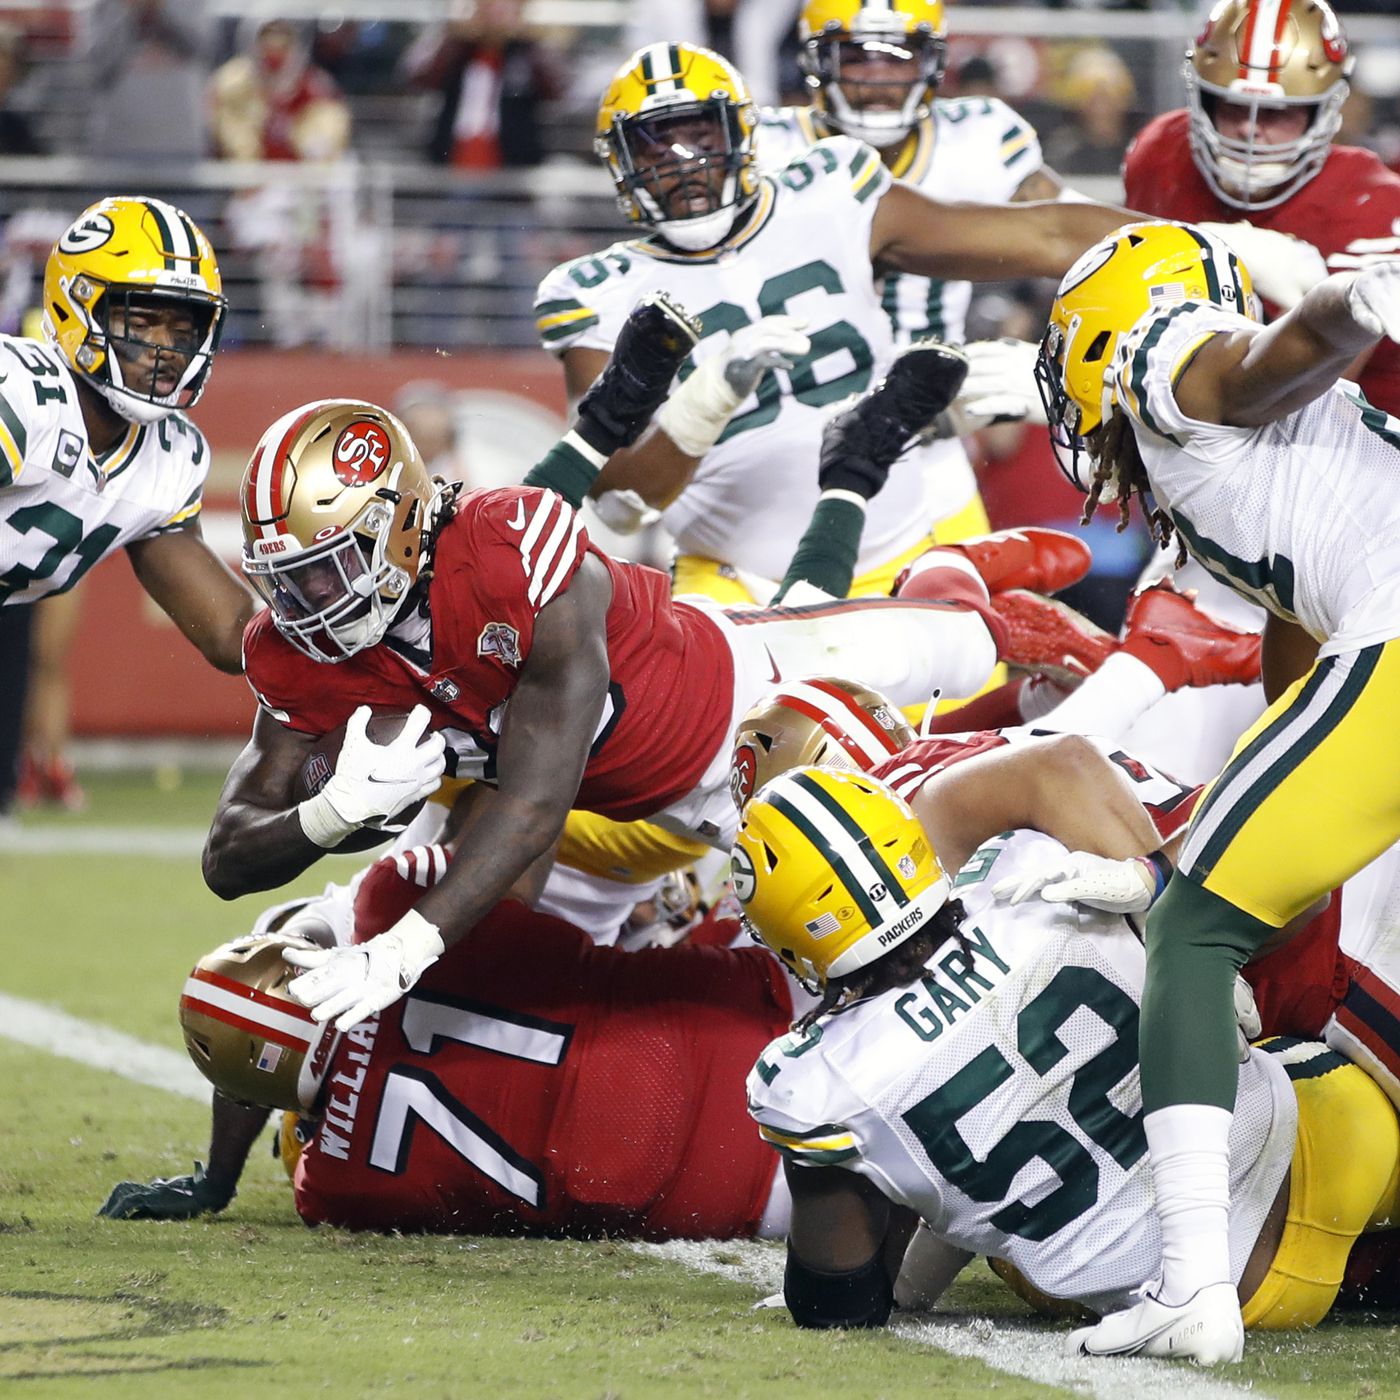 How to stream, watch Packers-49ers preseason game on TV - BVM Sports